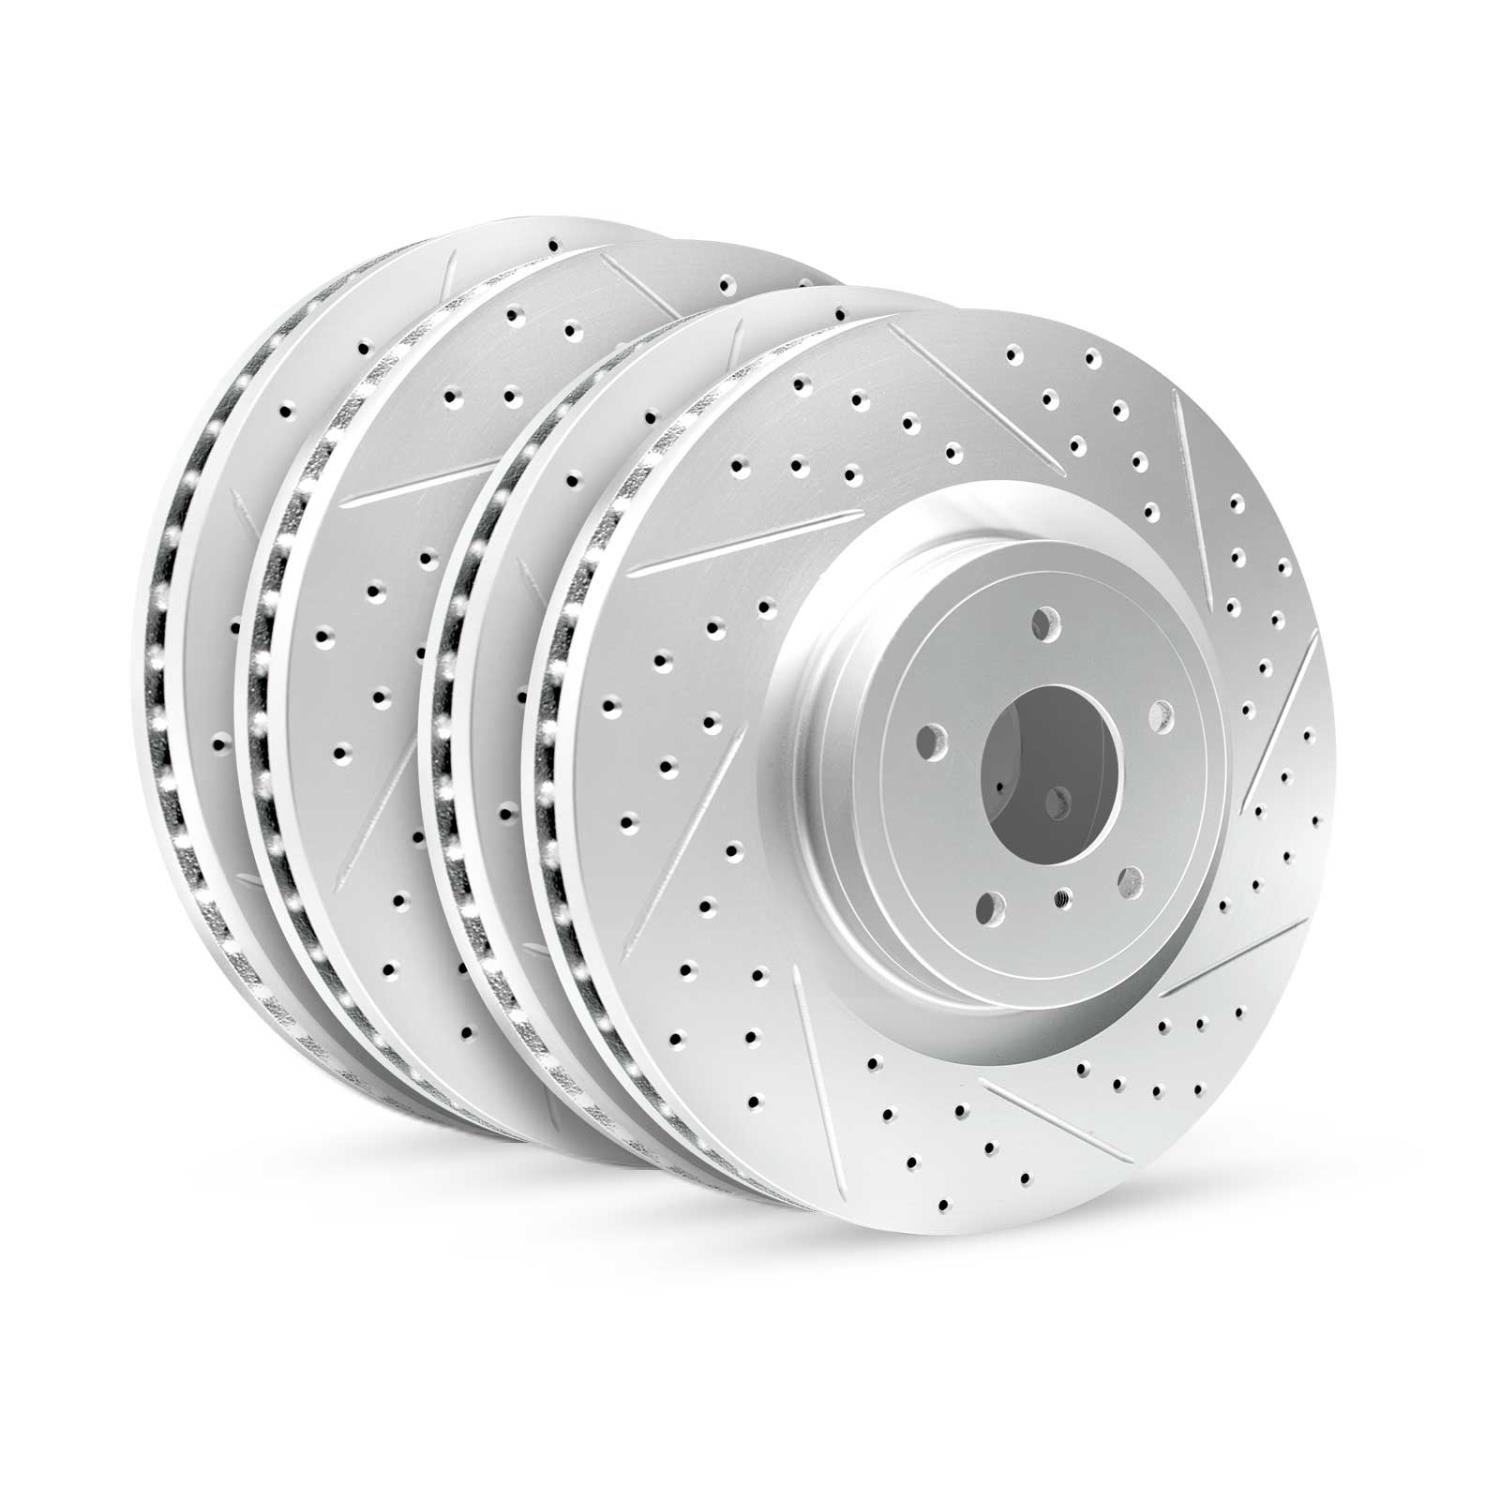 GEO-Carbon Drilled/Slotted Rotors, 2014-2021 BMW, Position: Front/Rear